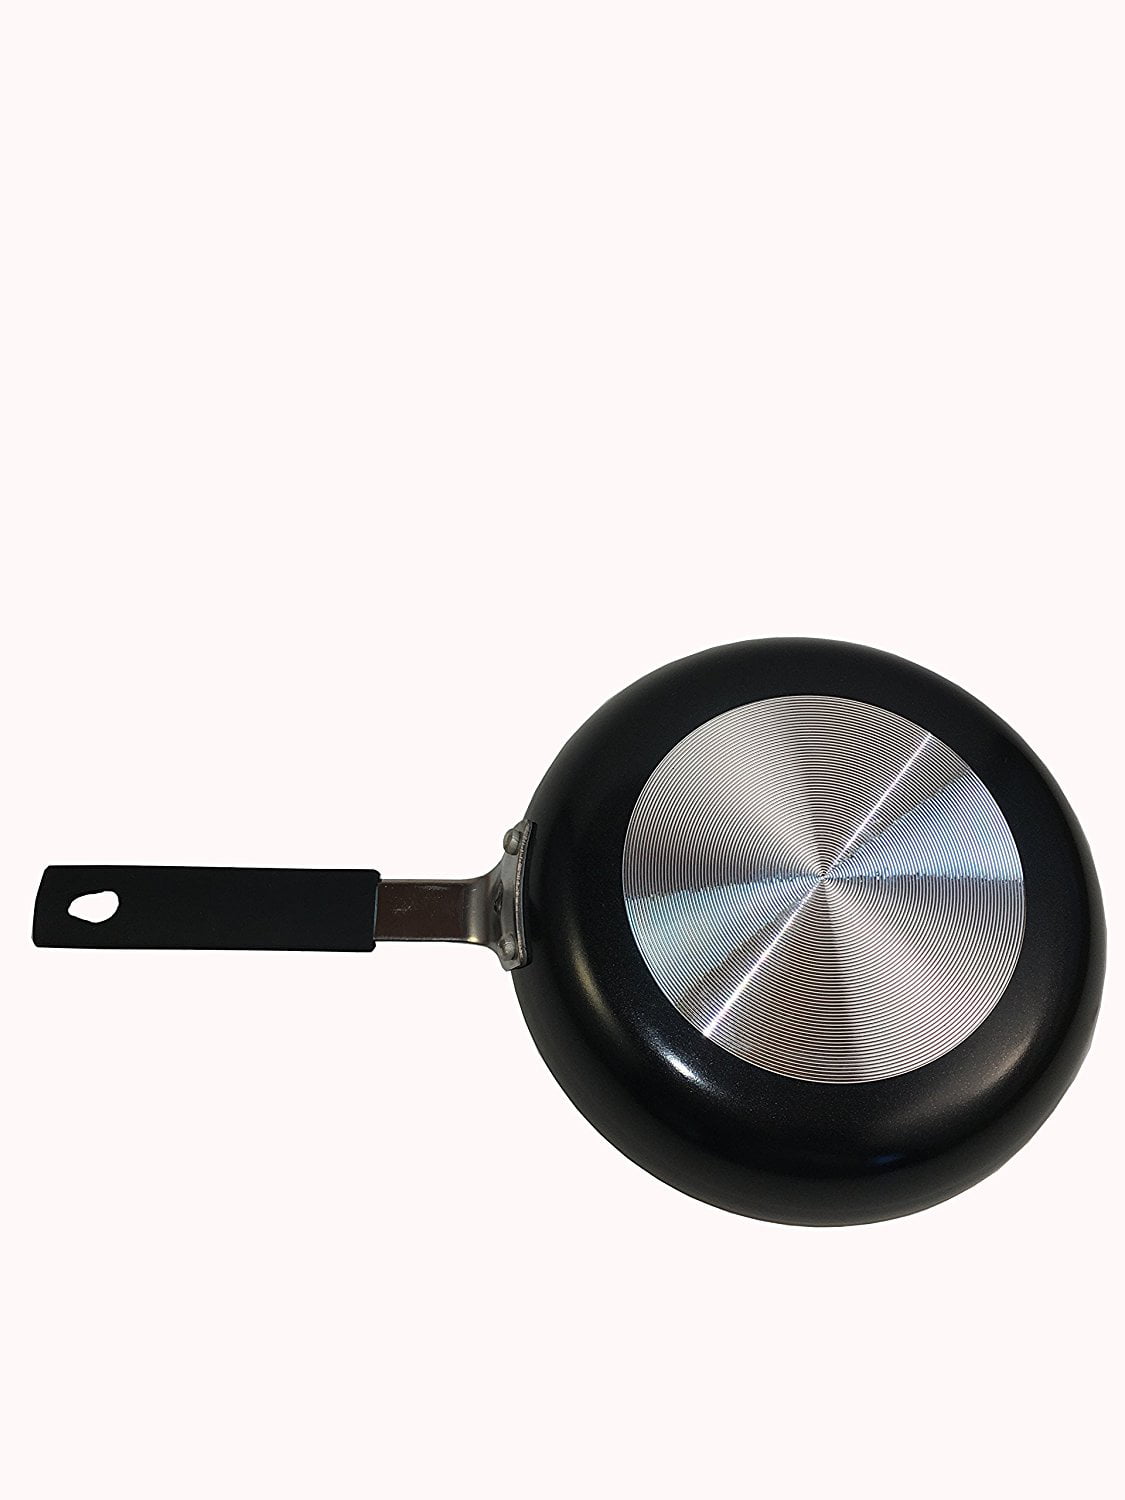 Frying Pan Small Round Mini Aluminum Non Stick Fry Pan 6.1/4 With